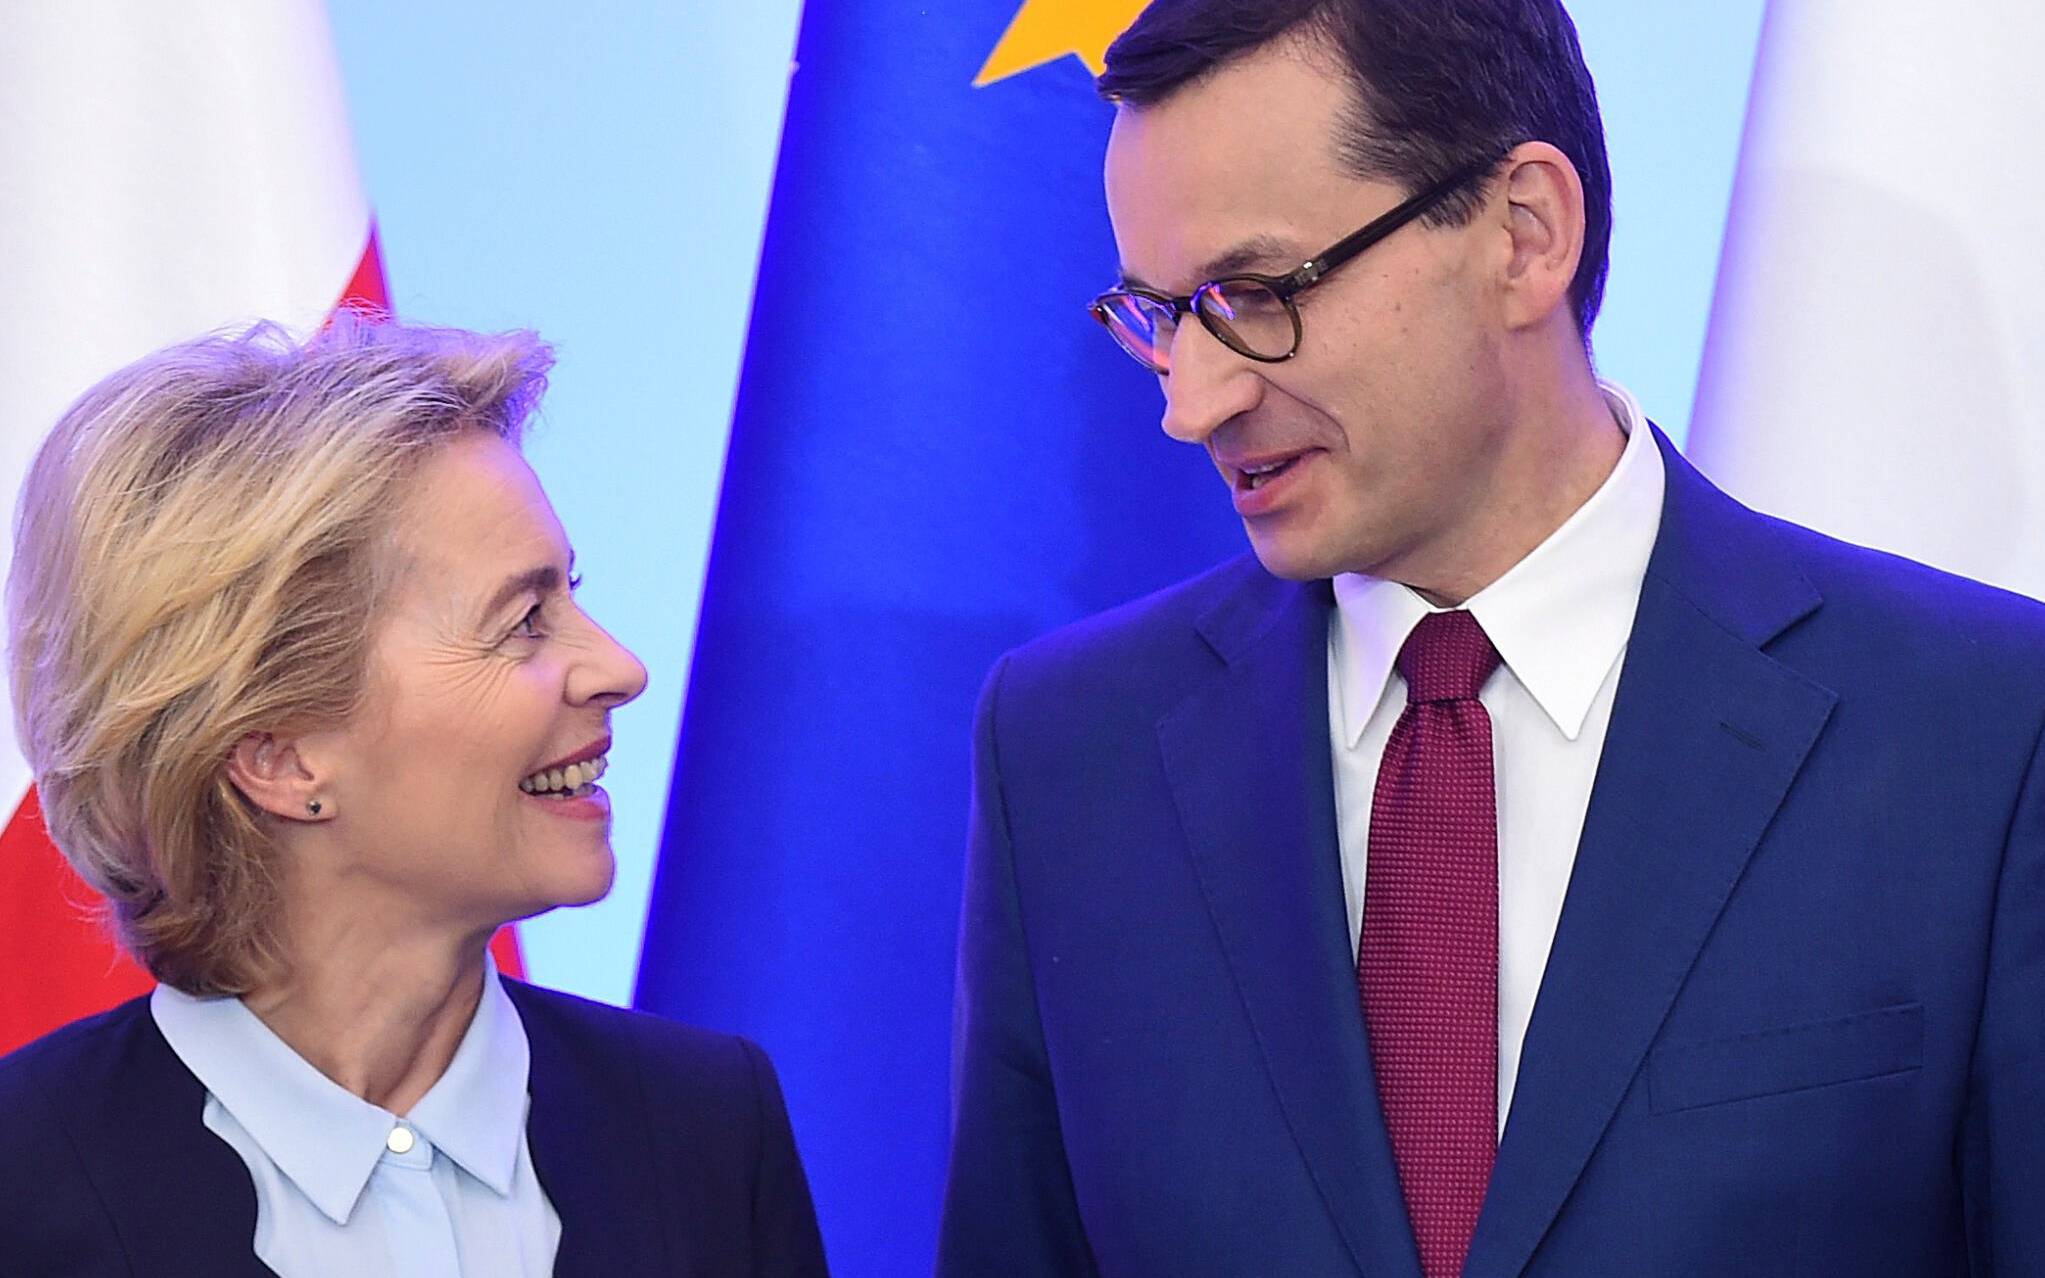 European Commission Chief Ursula Von der Leyen and Polish Prime Minister Mateusz Morawiecki share a smile during a meeting in Warsaw on July 25, 2019. (Photo by Janek SKARZYNSKI / AFP)